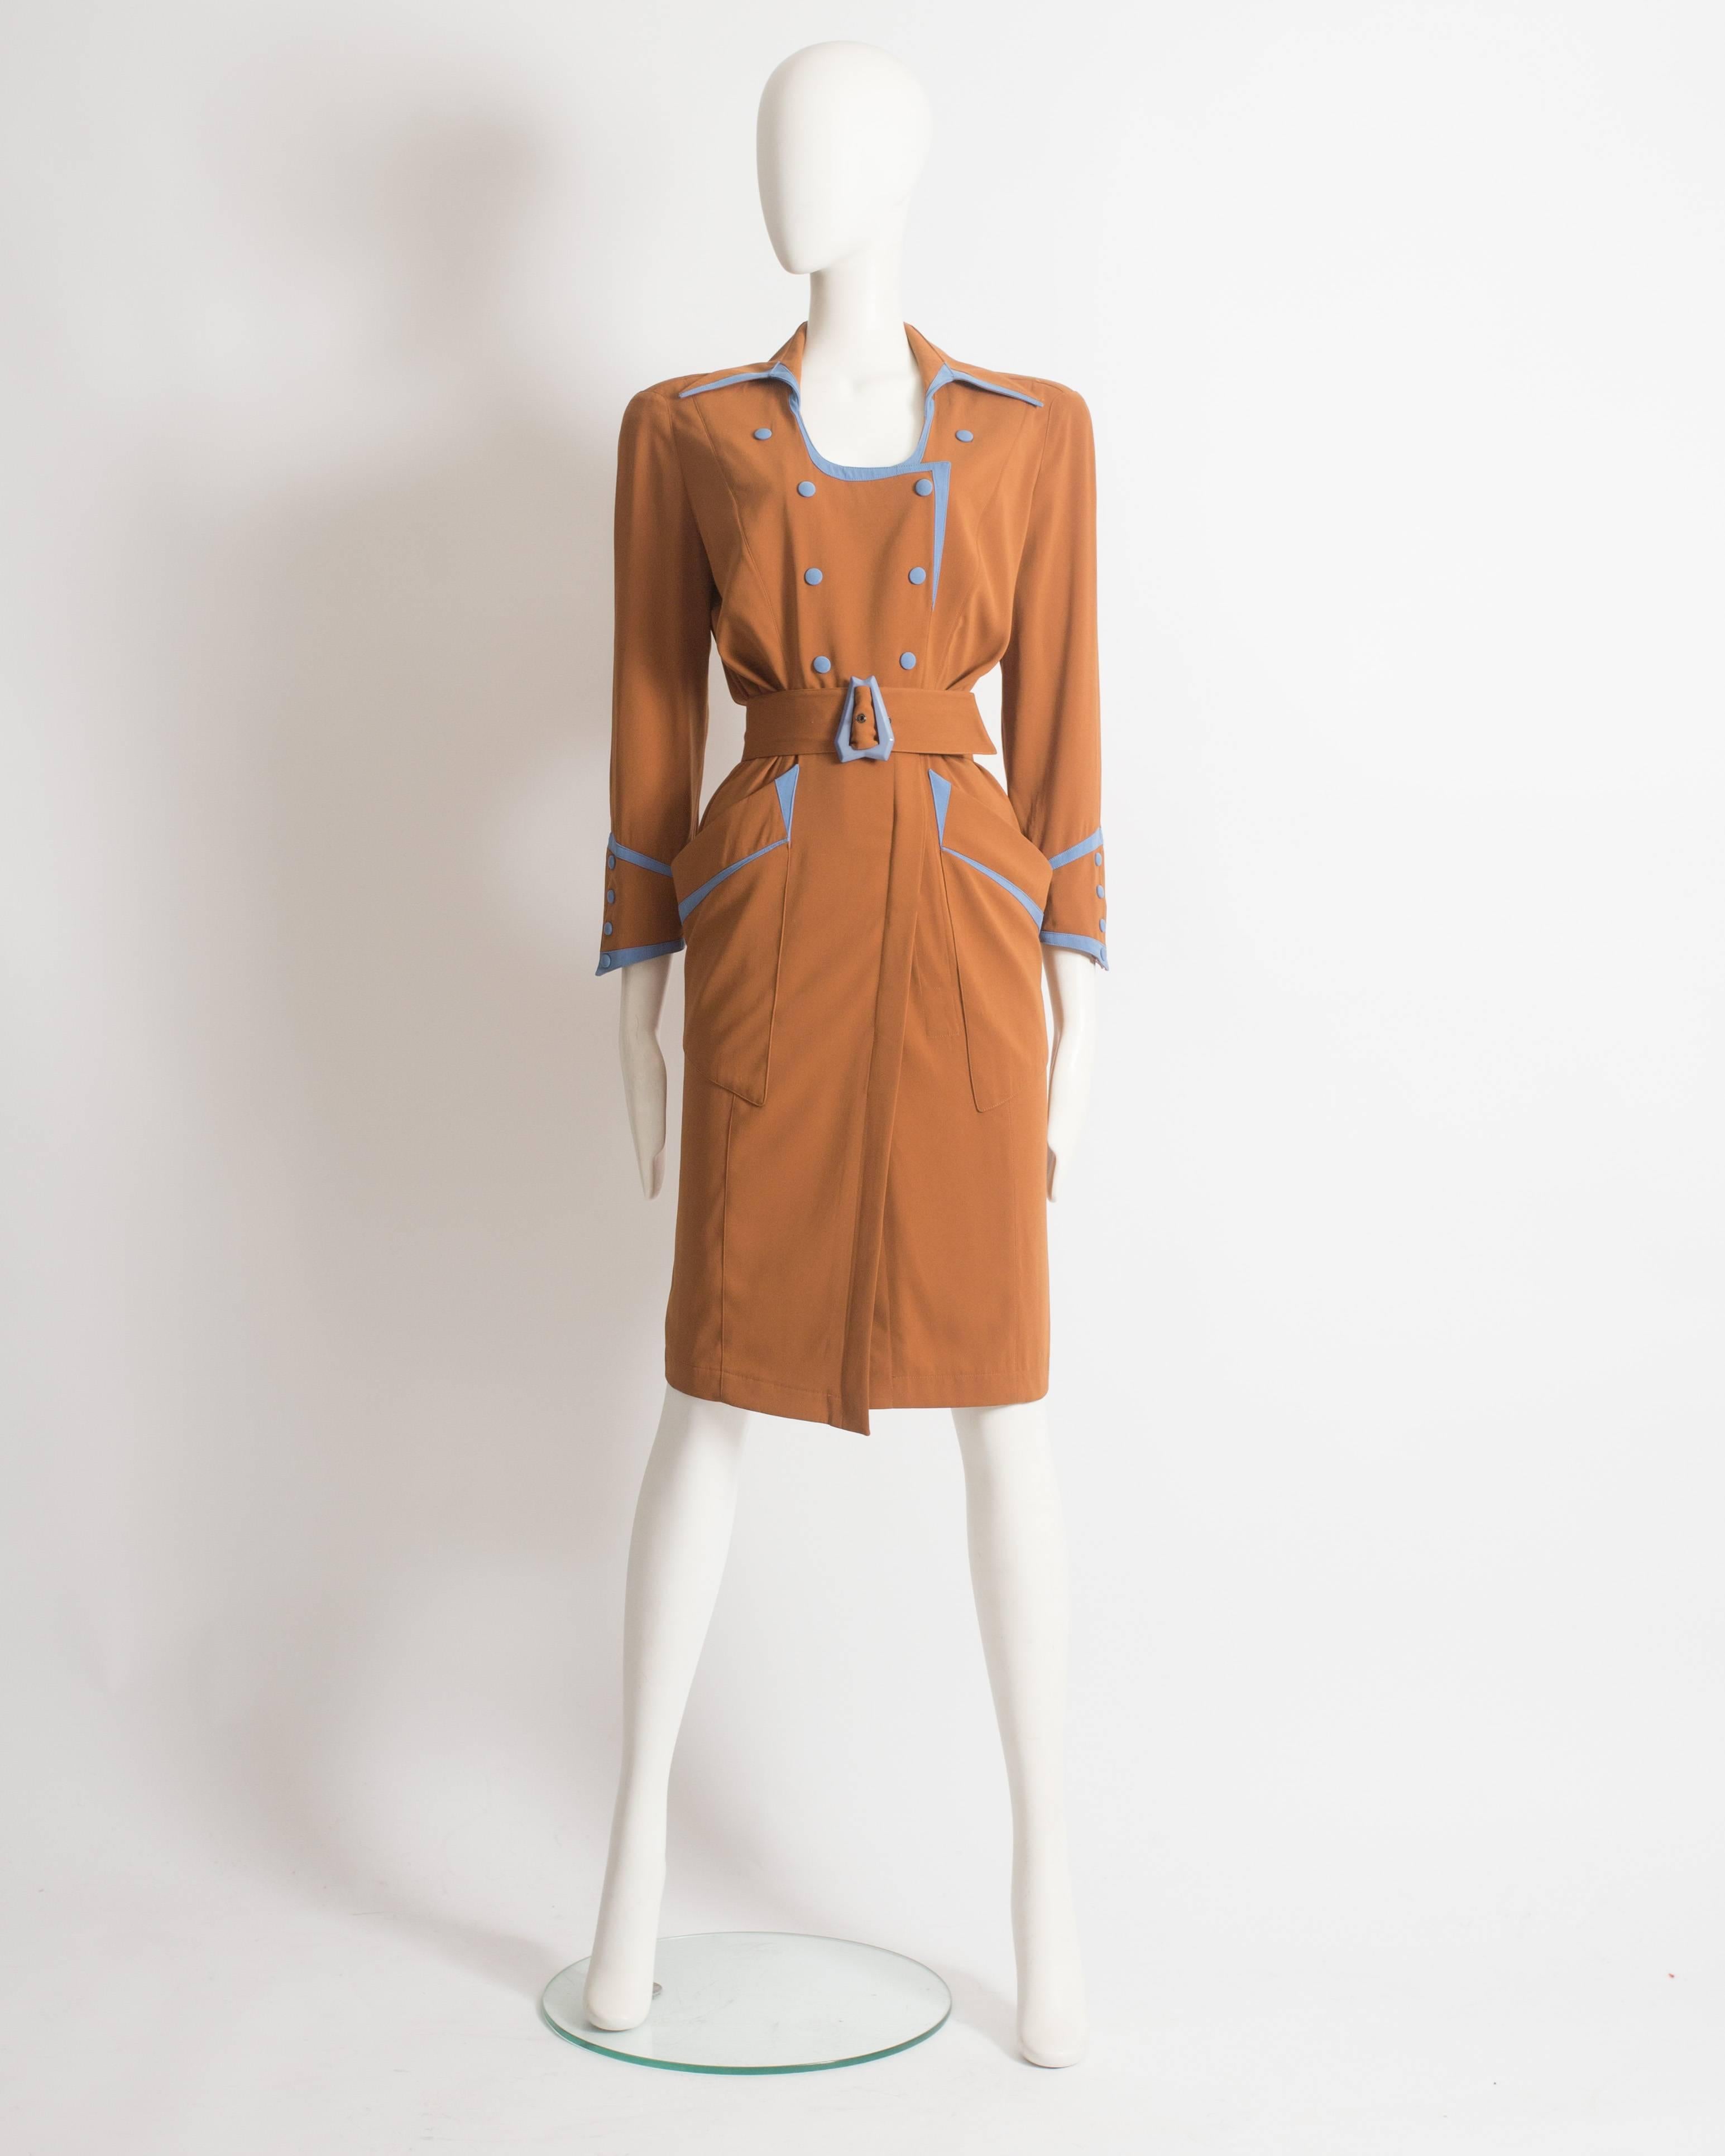 Thierry Mugler shirt dress constructed in mustard gabardine with sky blue trim. Snap button closures throughout, silk satin lining, long point collar with scoop neck, internal shoulder pads, two large front pockets and matching belt with blue